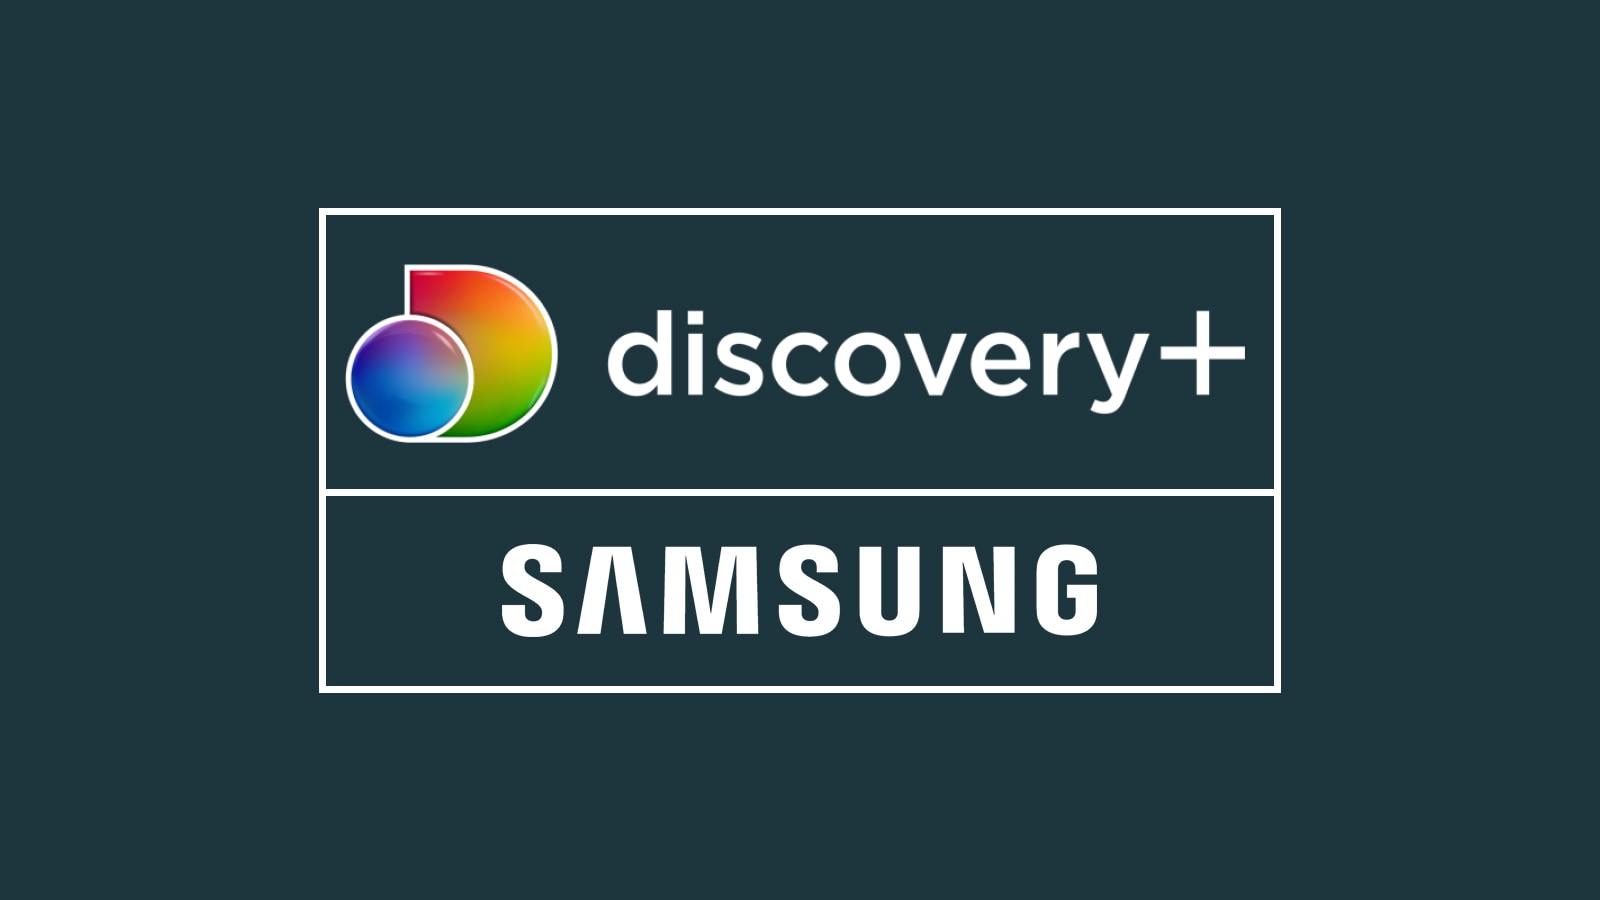 How To Get Discovery Plus On Samsung Smart TV